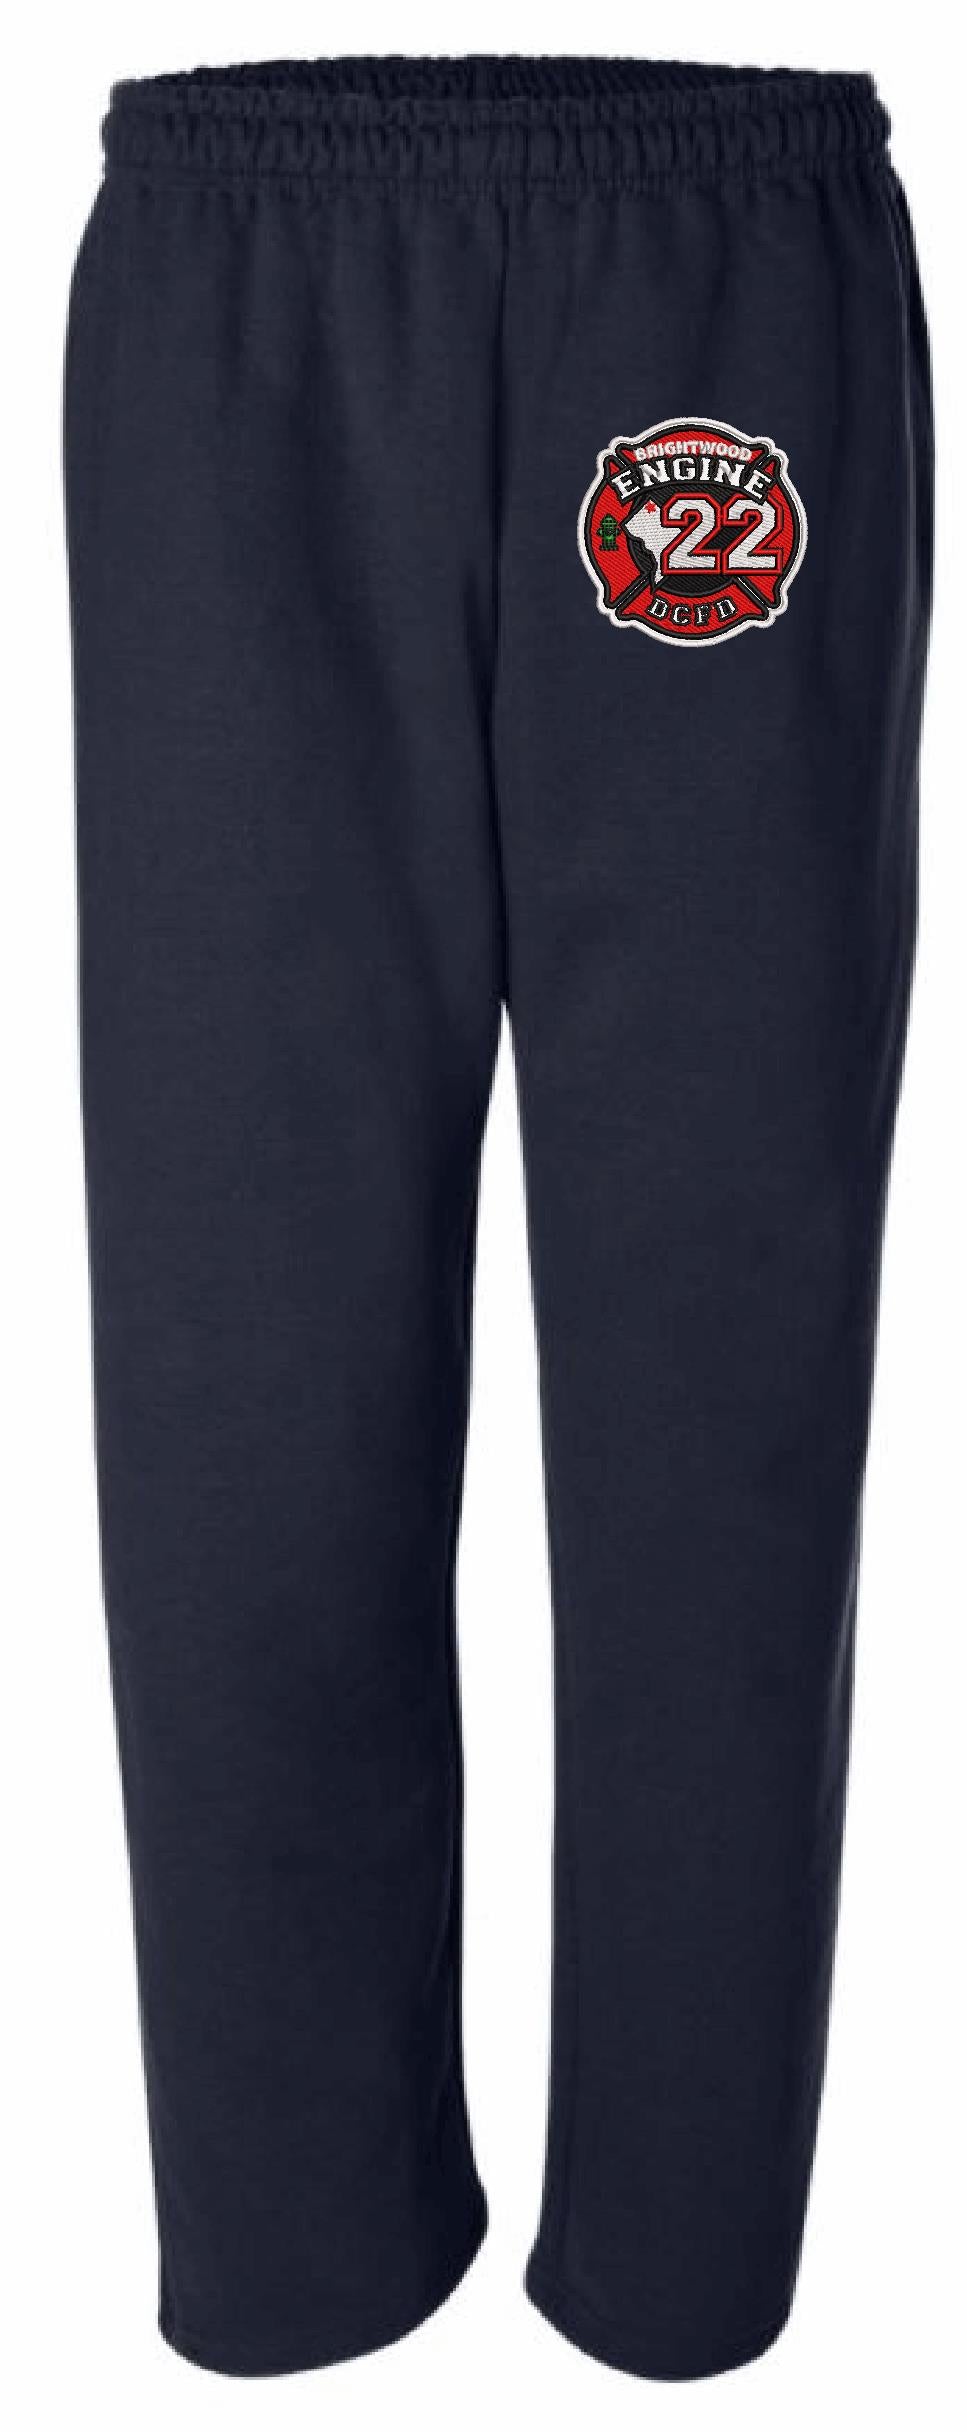 Brightwood / DCFD Embroidered Sweatpants - Powercall Sirens LLC